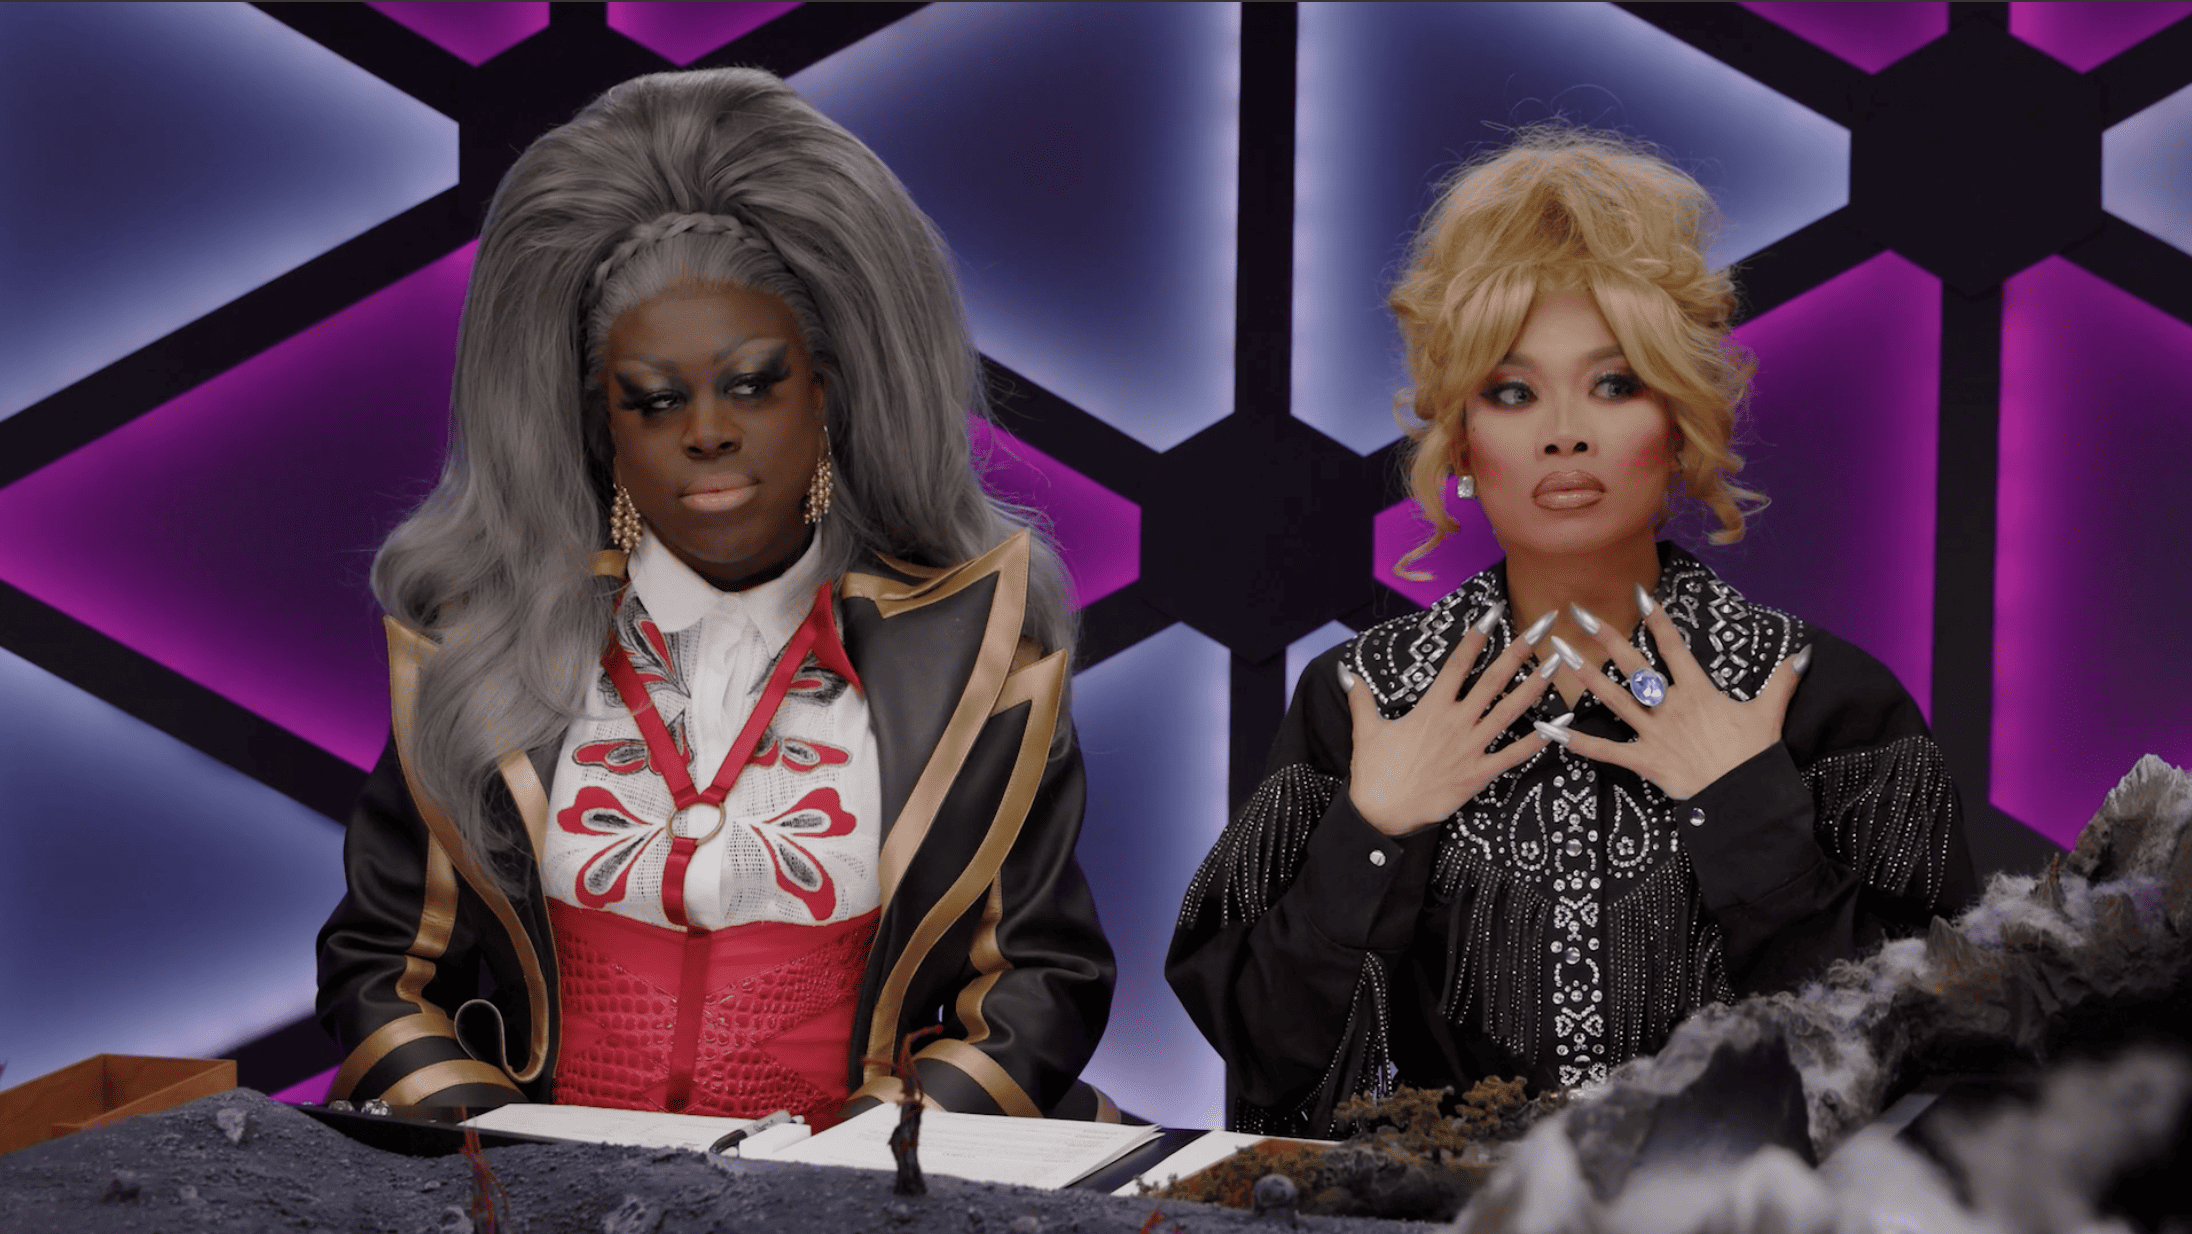 Two drag queens sit next to each other, one gasping, in a game of Dungeons and Dragons in this image from Dropout